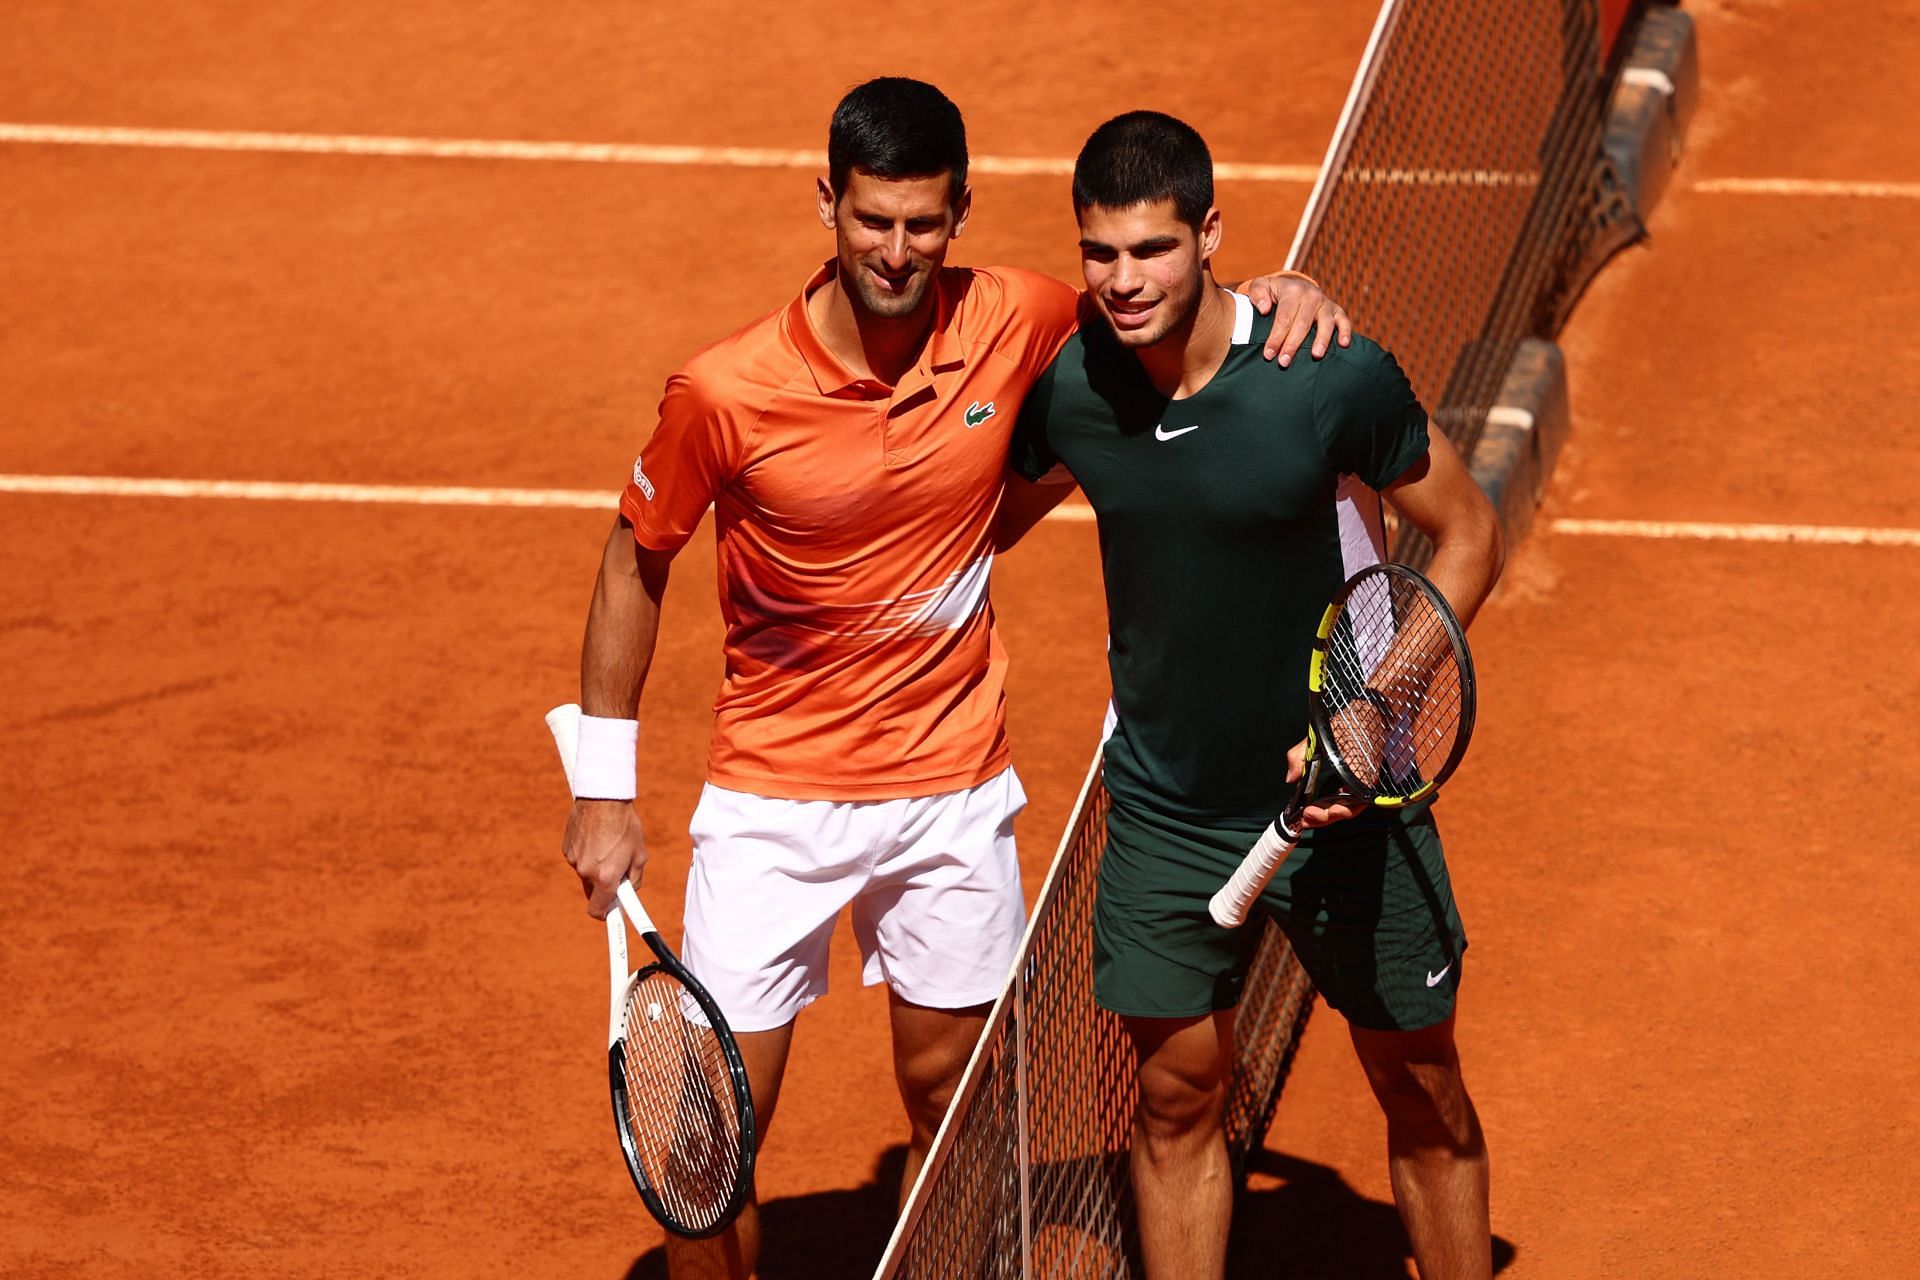 Novak Djokovic and Carlos Alcaraz were dubbed the favorites for the 2023 French Open by Toni Nadal.